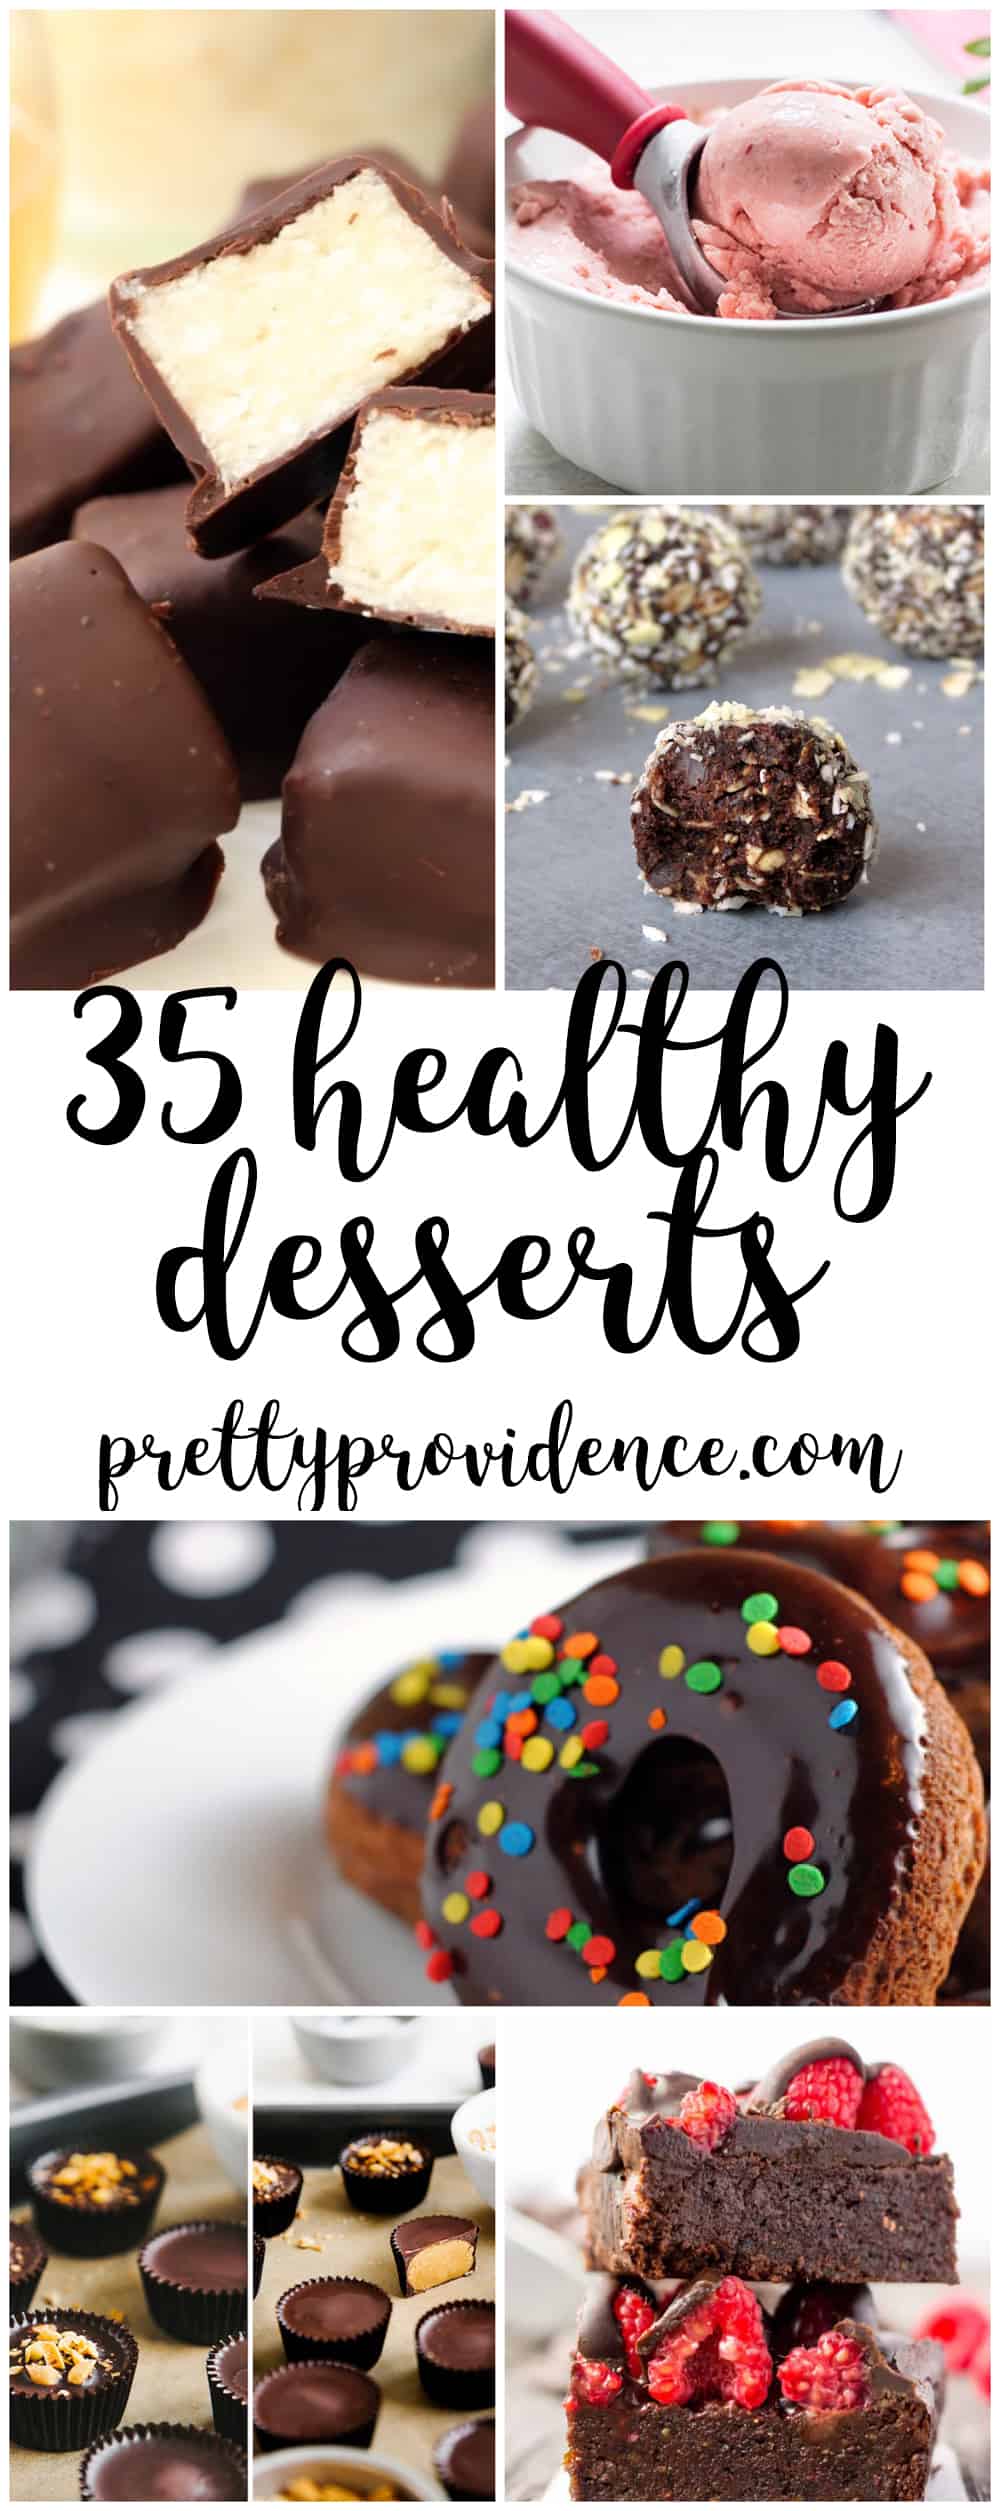 Eating healthy doesn't have to be a chore! These delicious healthy dessert recipes will make indulging in a sweet treat fun and guilt free! 